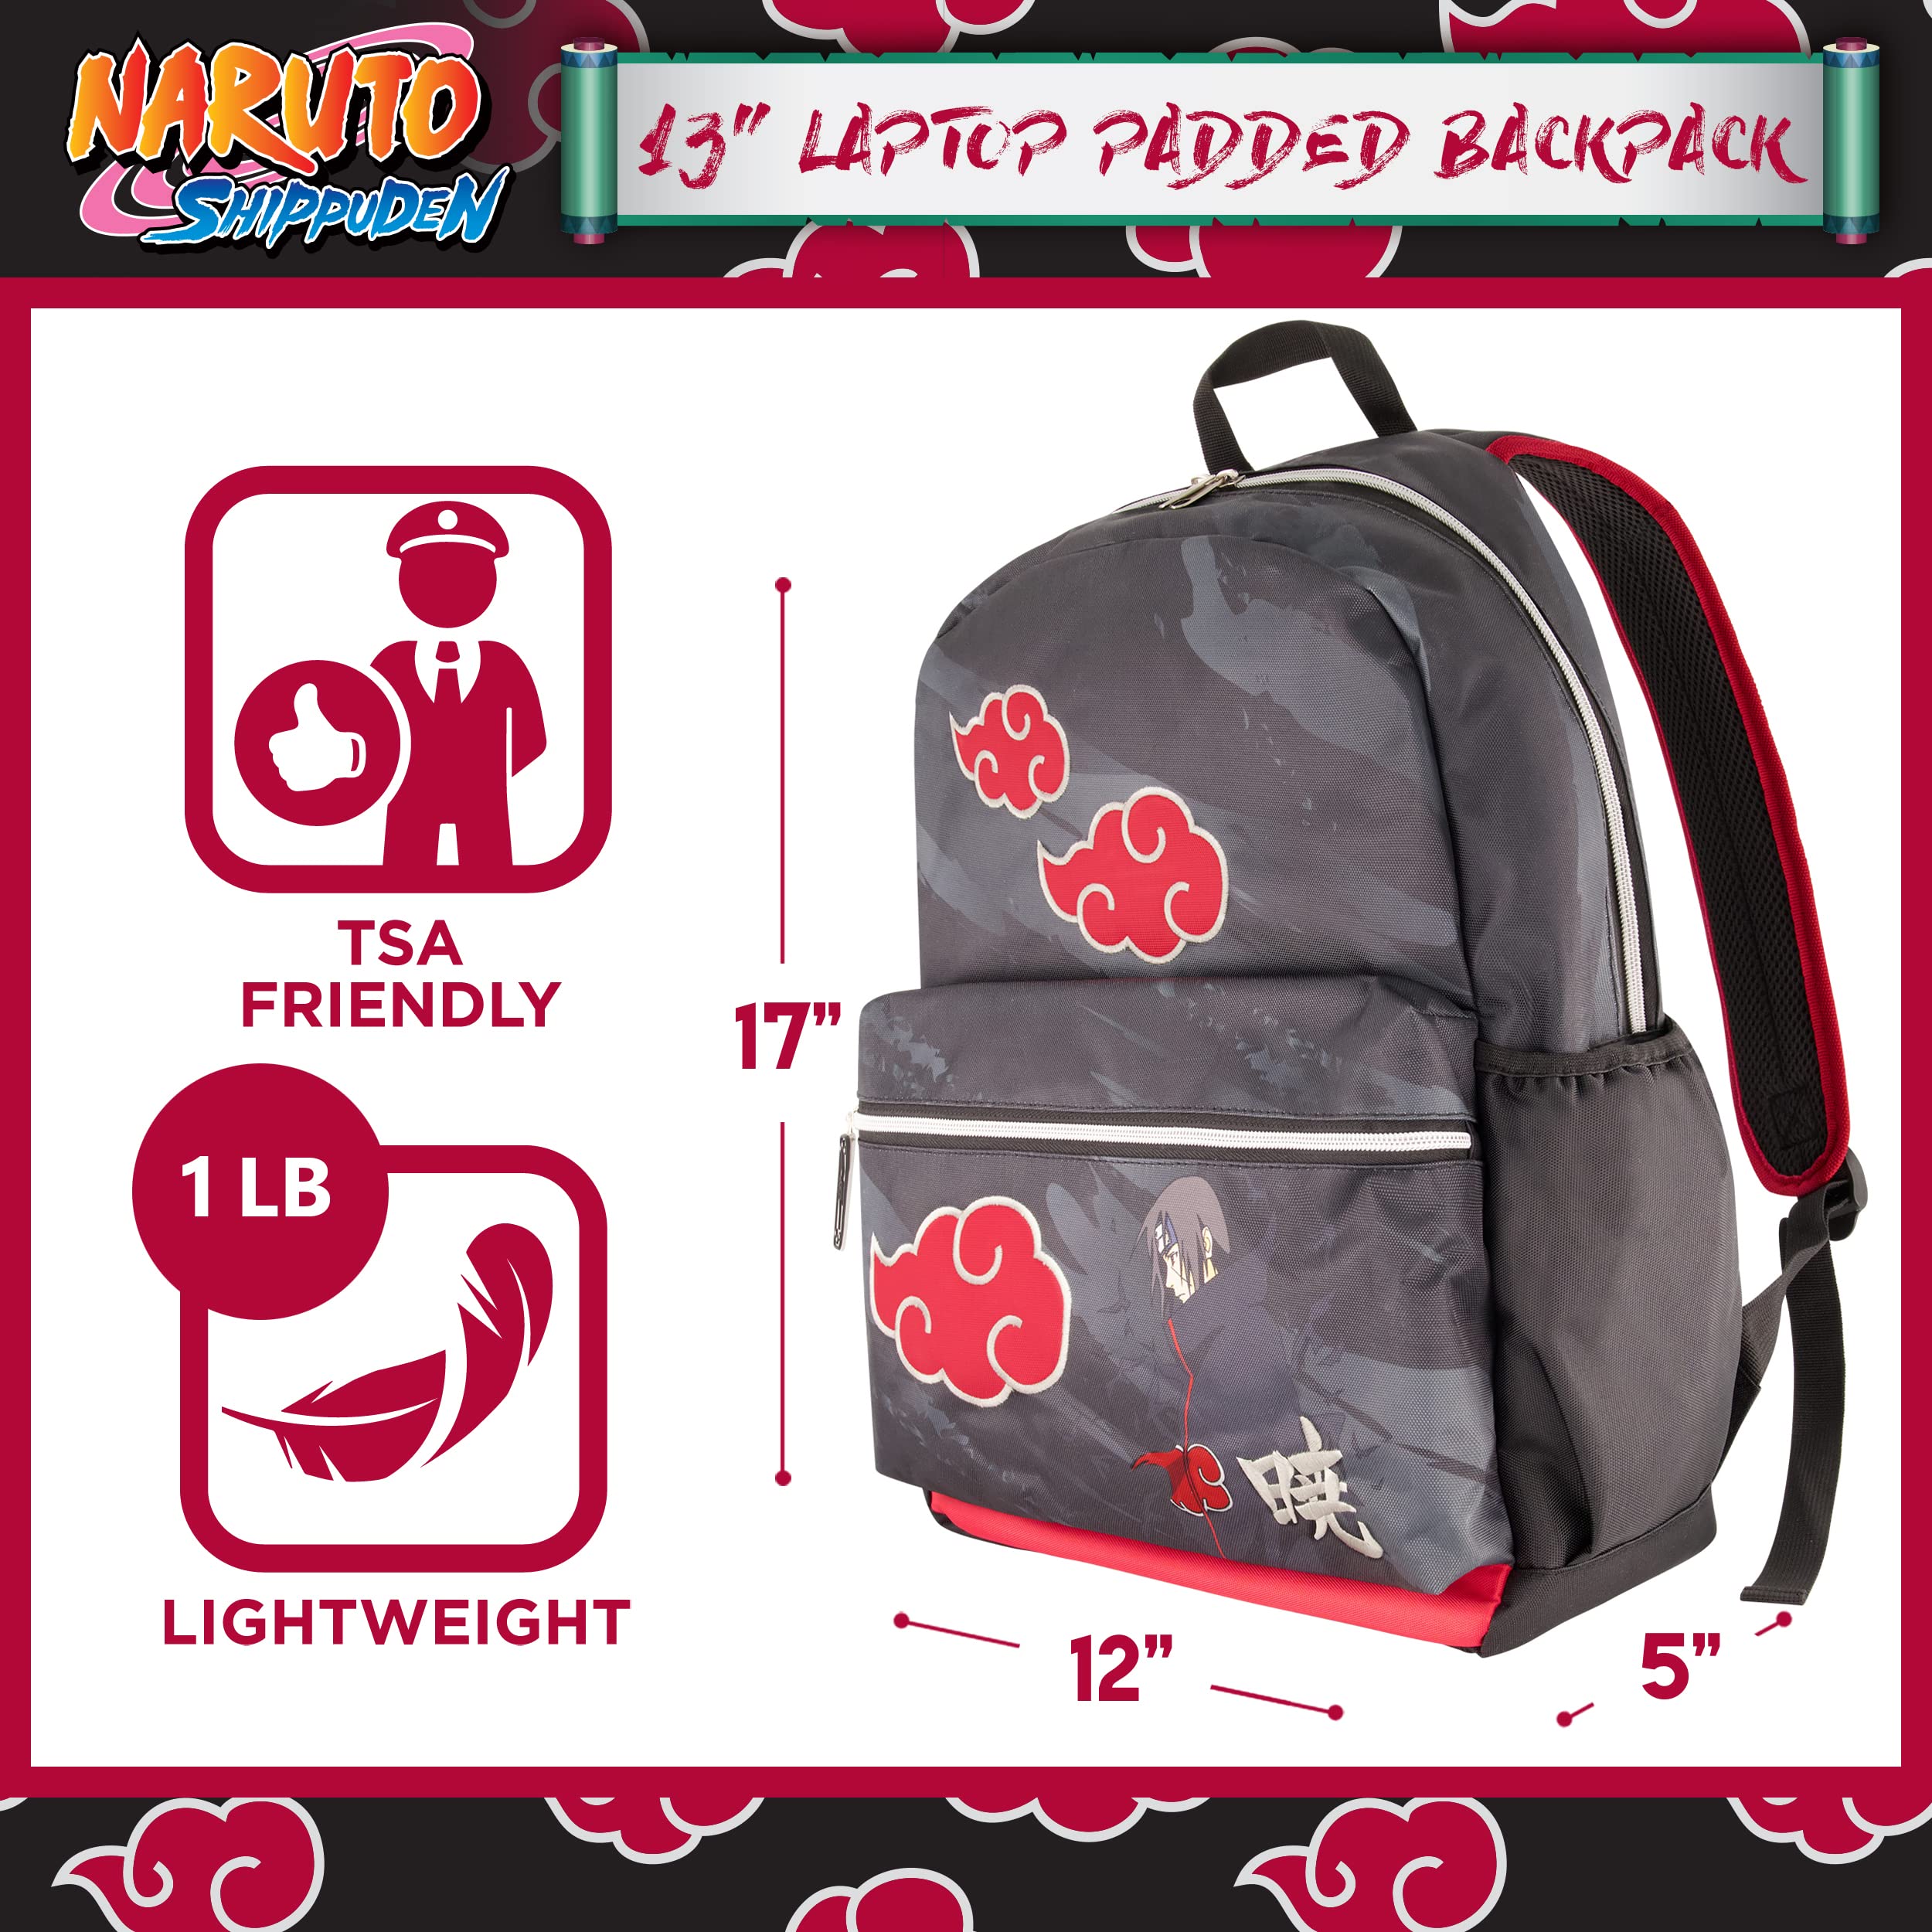 Naruto 13 Inch Sleeve Laptop Backpack, Padded Computer Bag for Commute or Travel, Akatsuki Itachi, One Size